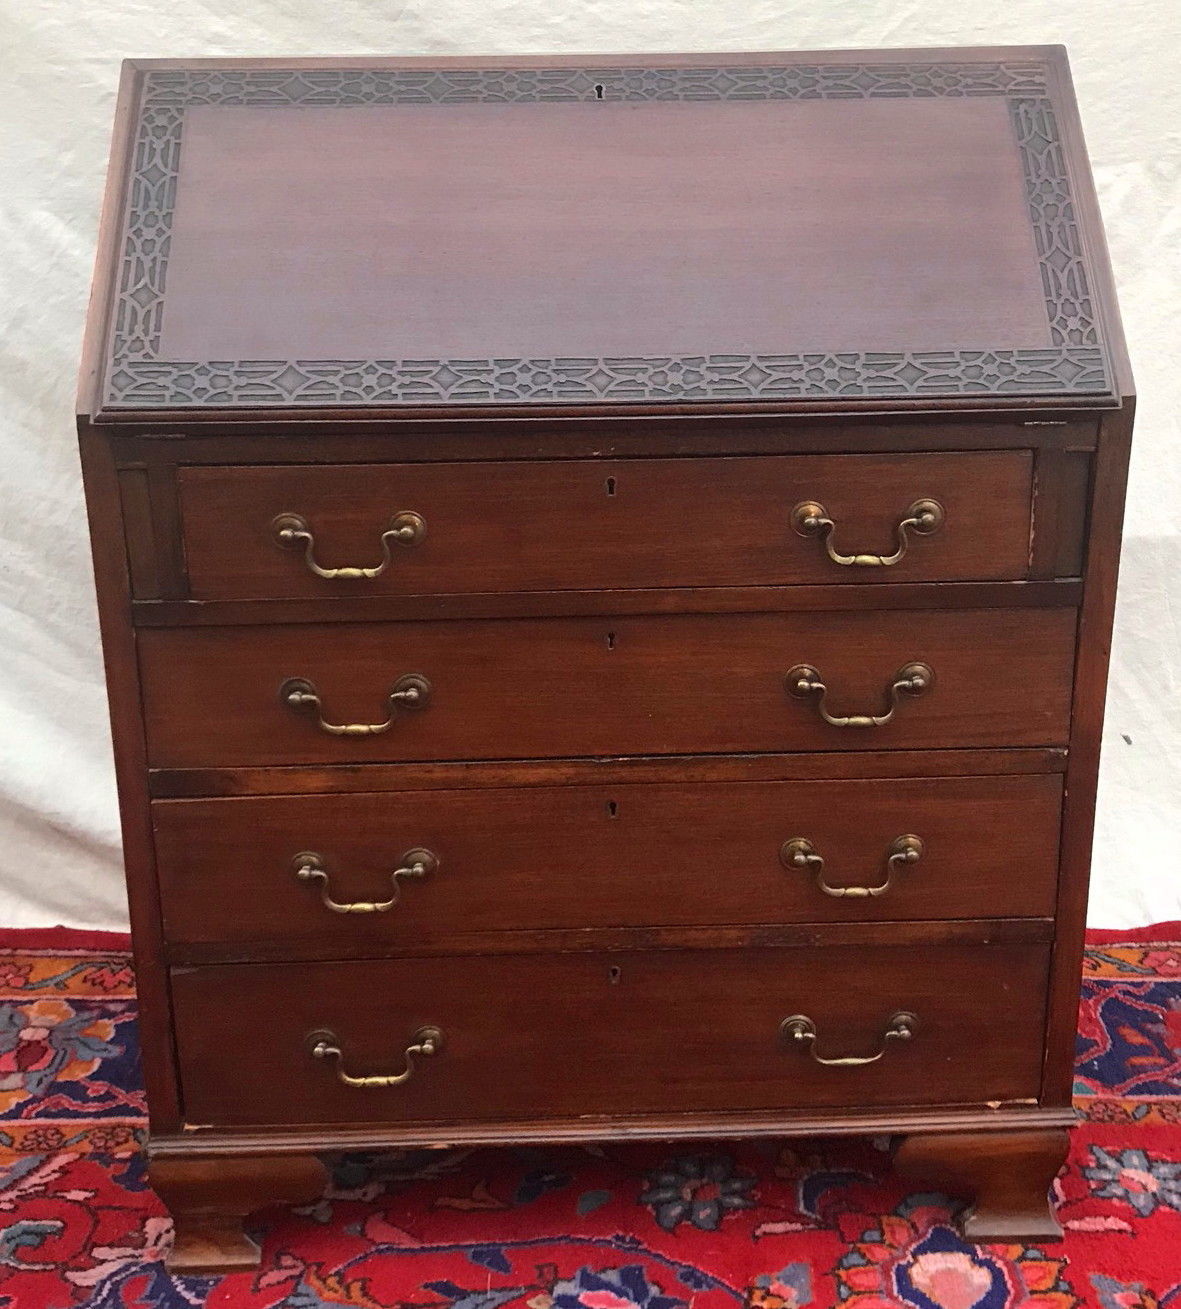 ANTIQUE CHINESE CHIPPENDALE STYLED MAHOGANY DESK IN DESIRABLE SIZE